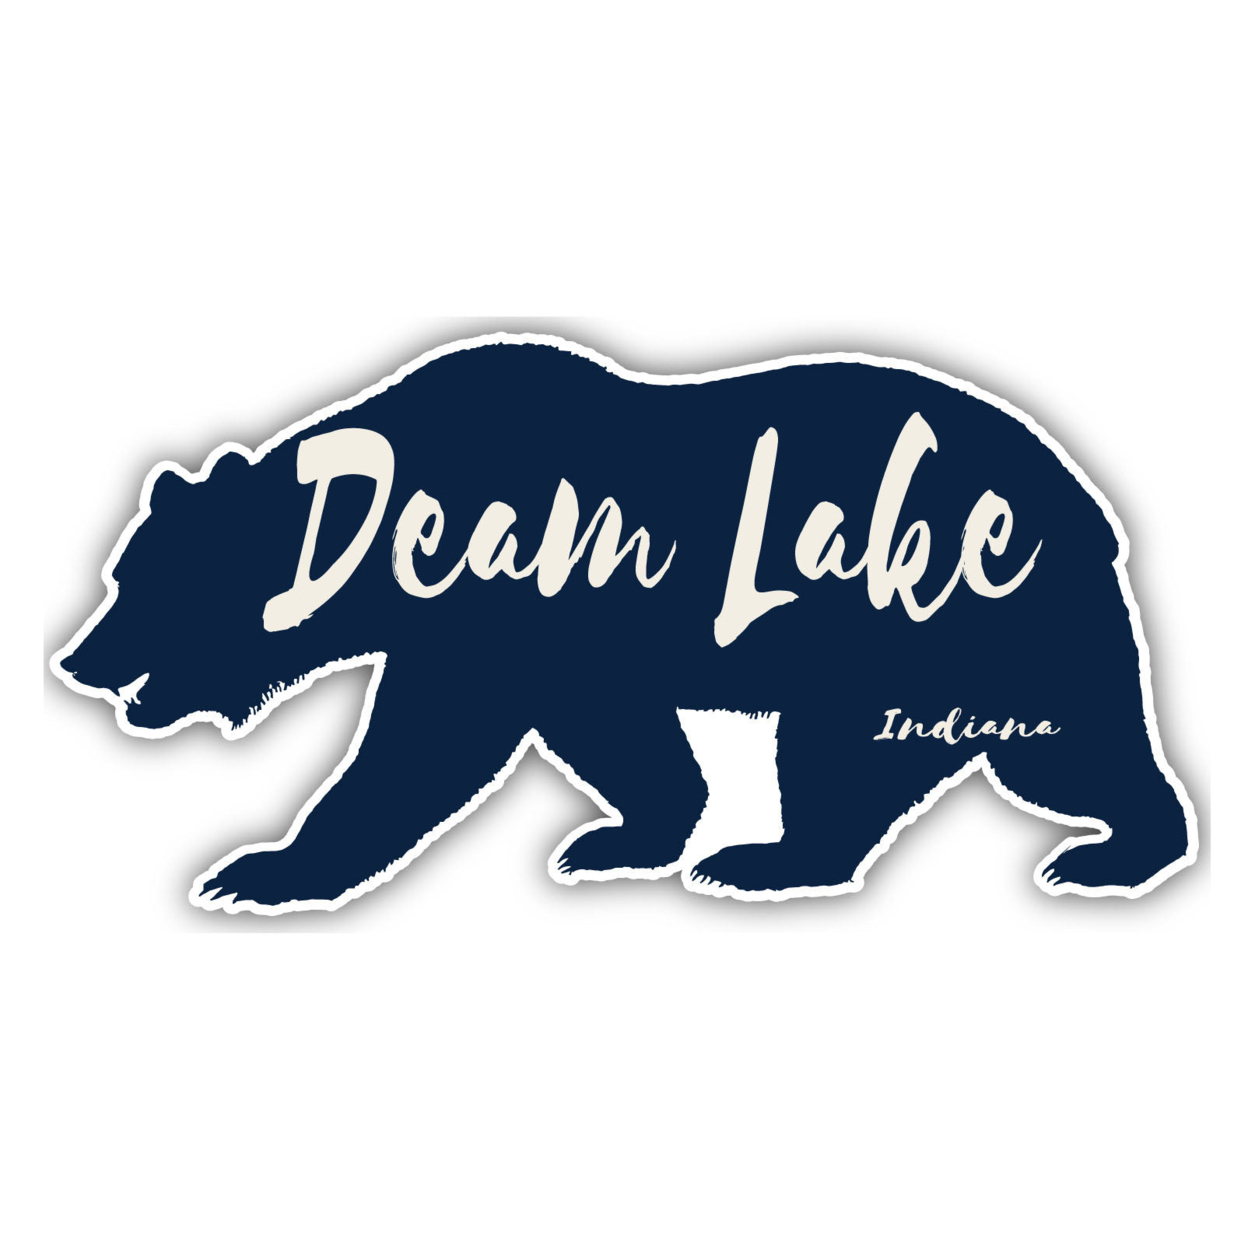 Deam Lake Indiana Souvenir Decorative Stickers (Choose Theme And Size) - Single Unit, 2-Inch, Great Outdoors